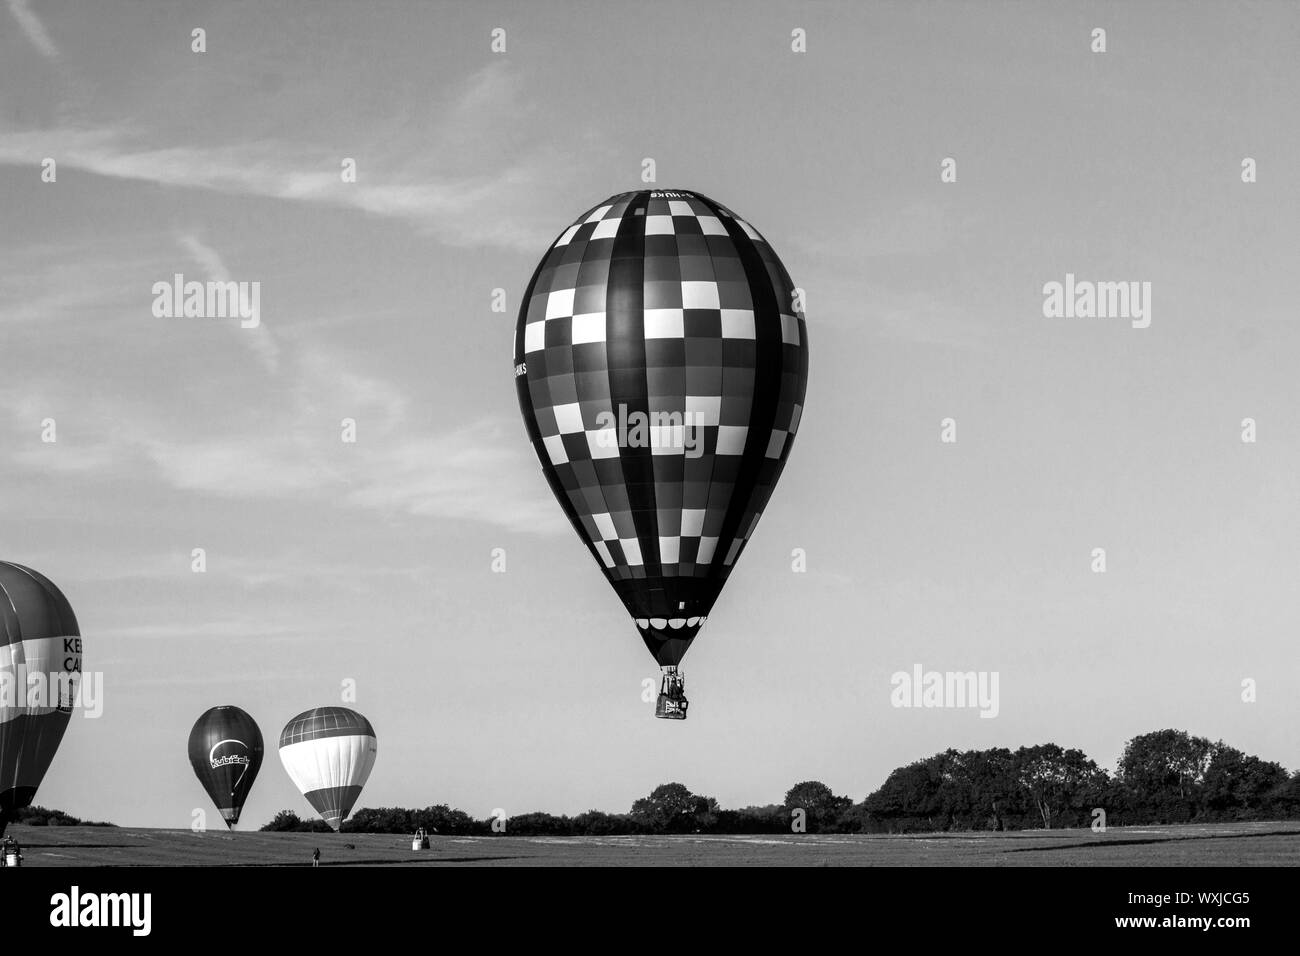 A tear shaped hot air balloon landing, the a wonky treeline behind. Black and white. An image of feeling and movement Stock Photo